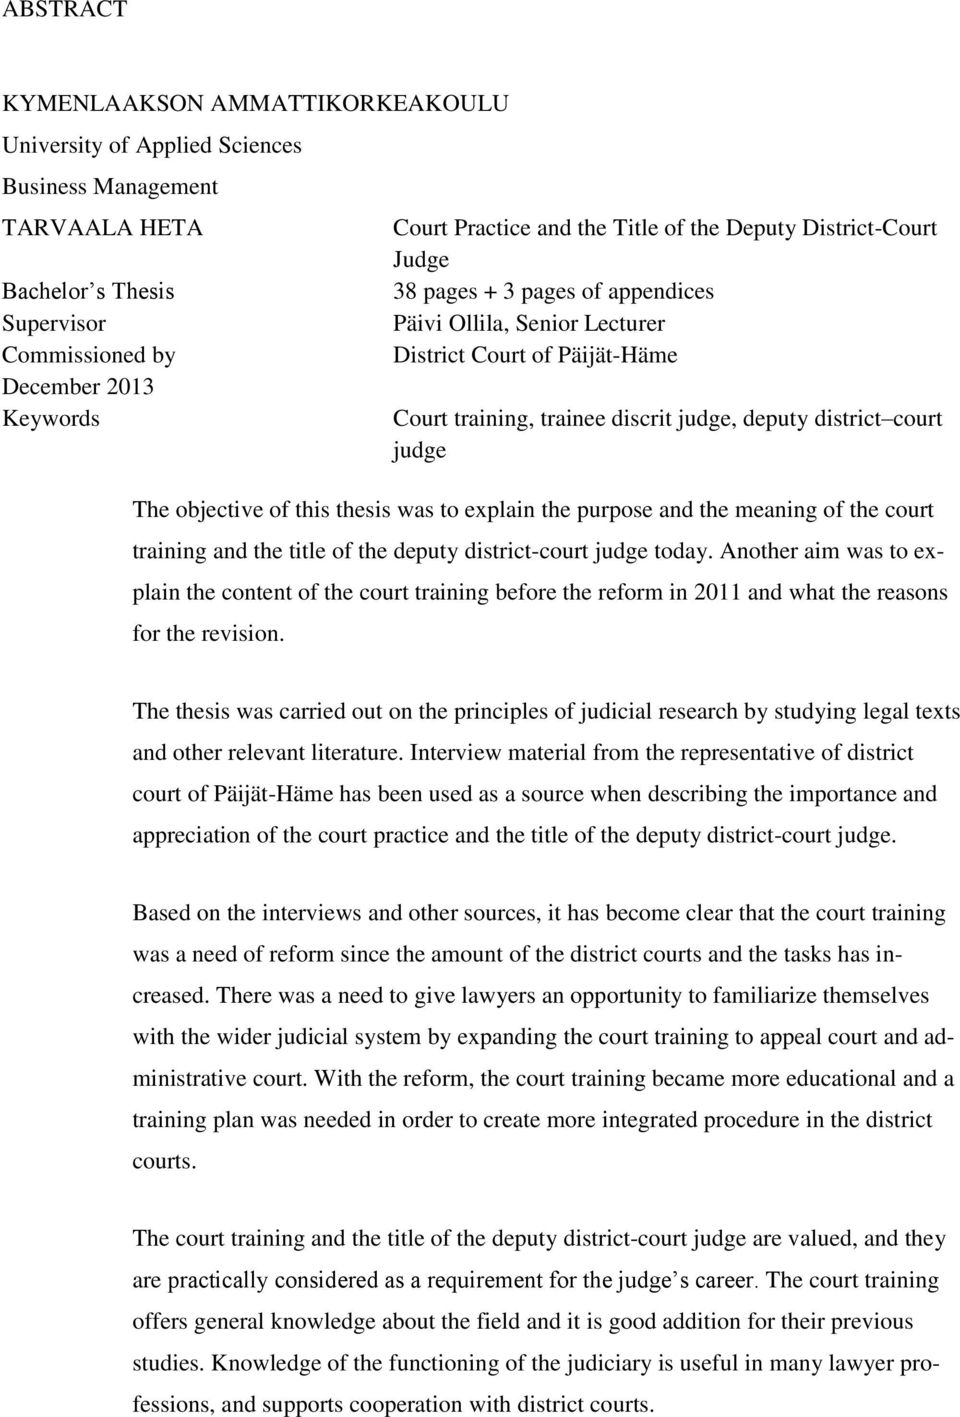 judge The objective of this thesis was to explain the purpose and the meaning of the court training and the title of the deputy district-court judge today.